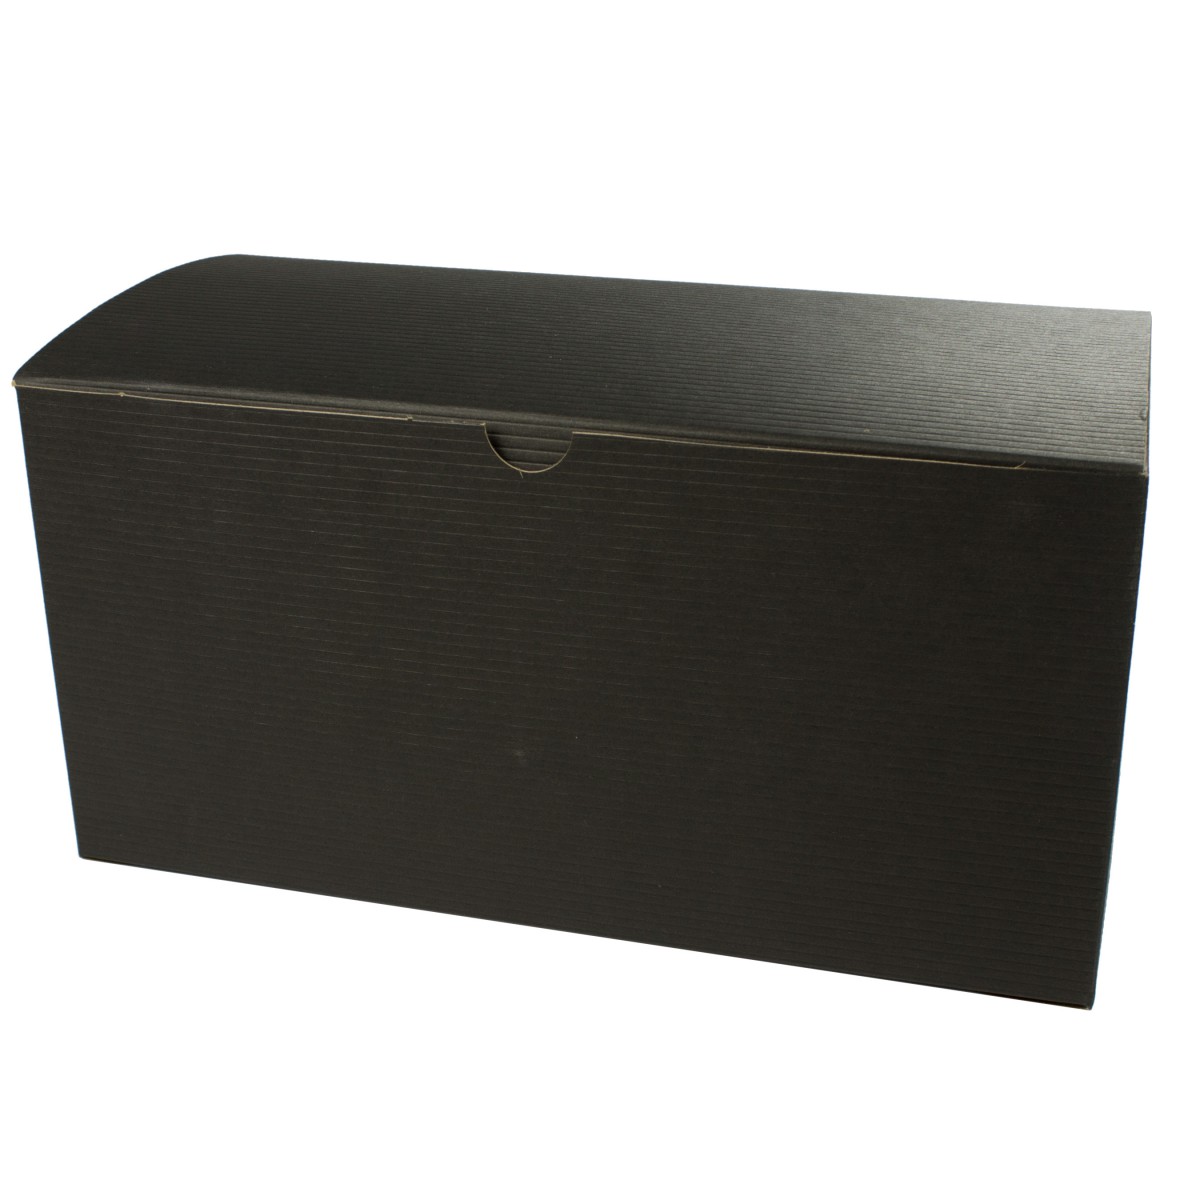 10x5x4 Black Pinstripe One-Piece Tuck Top Gift Boxes